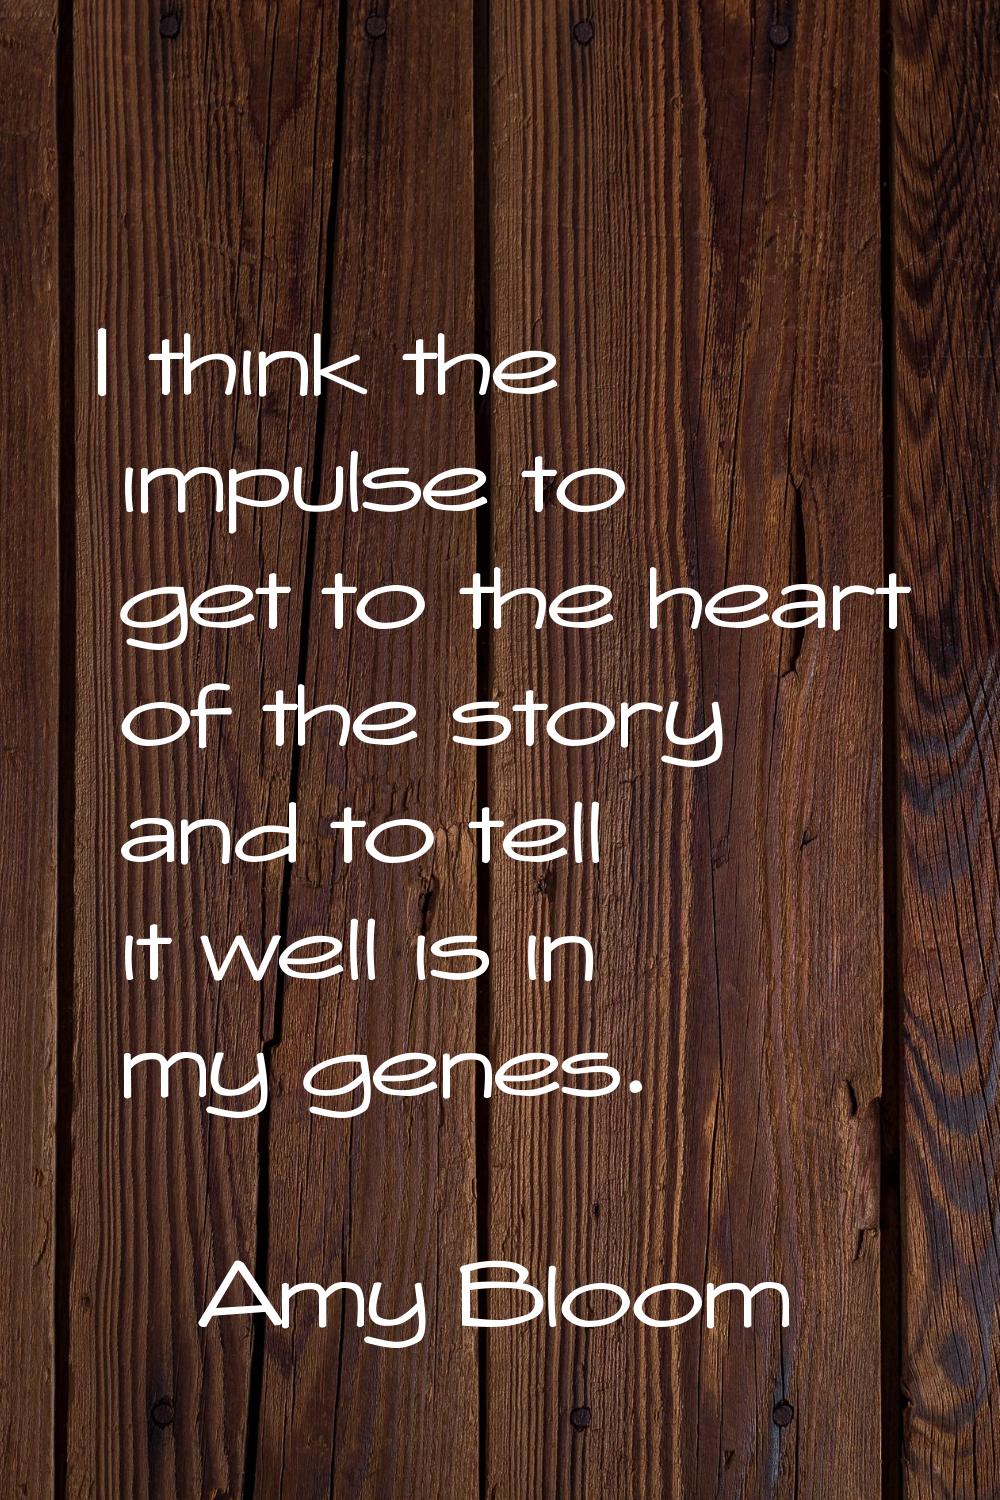 I think the impulse to get to the heart of the story and to tell it well is in my genes.